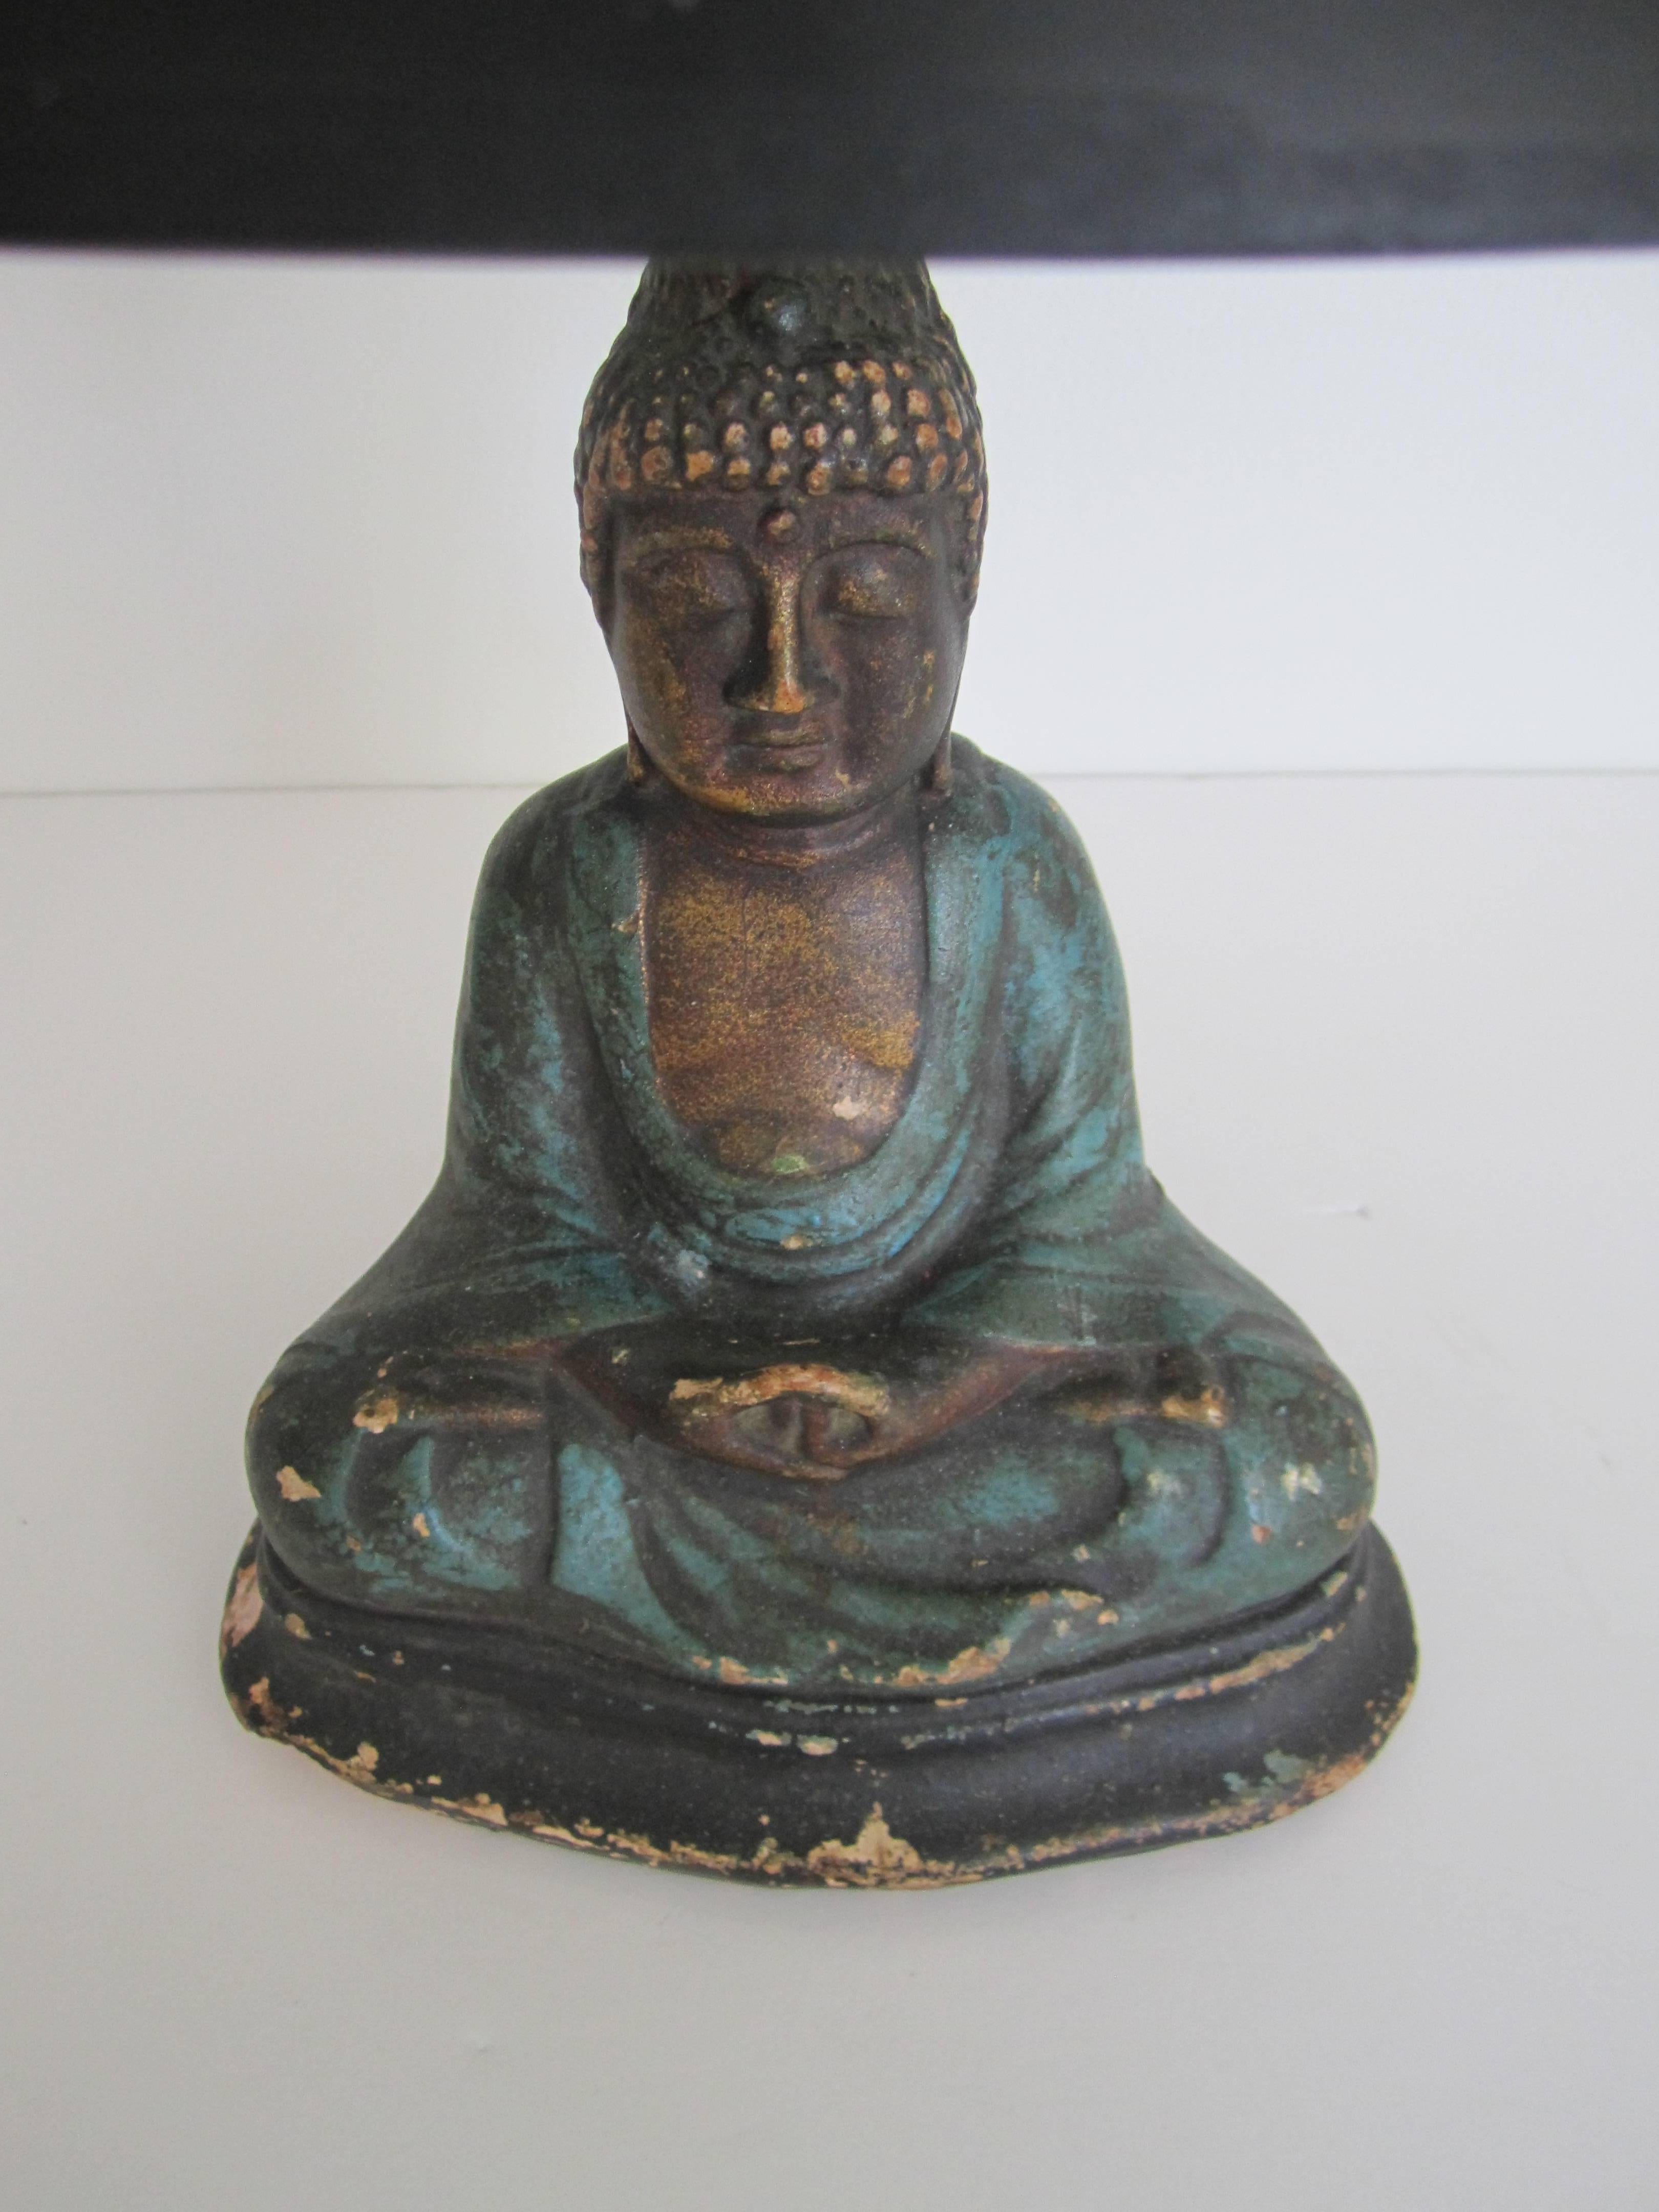 American Antique Seated Buddha Desk or Table Lamp, ca. 1920s